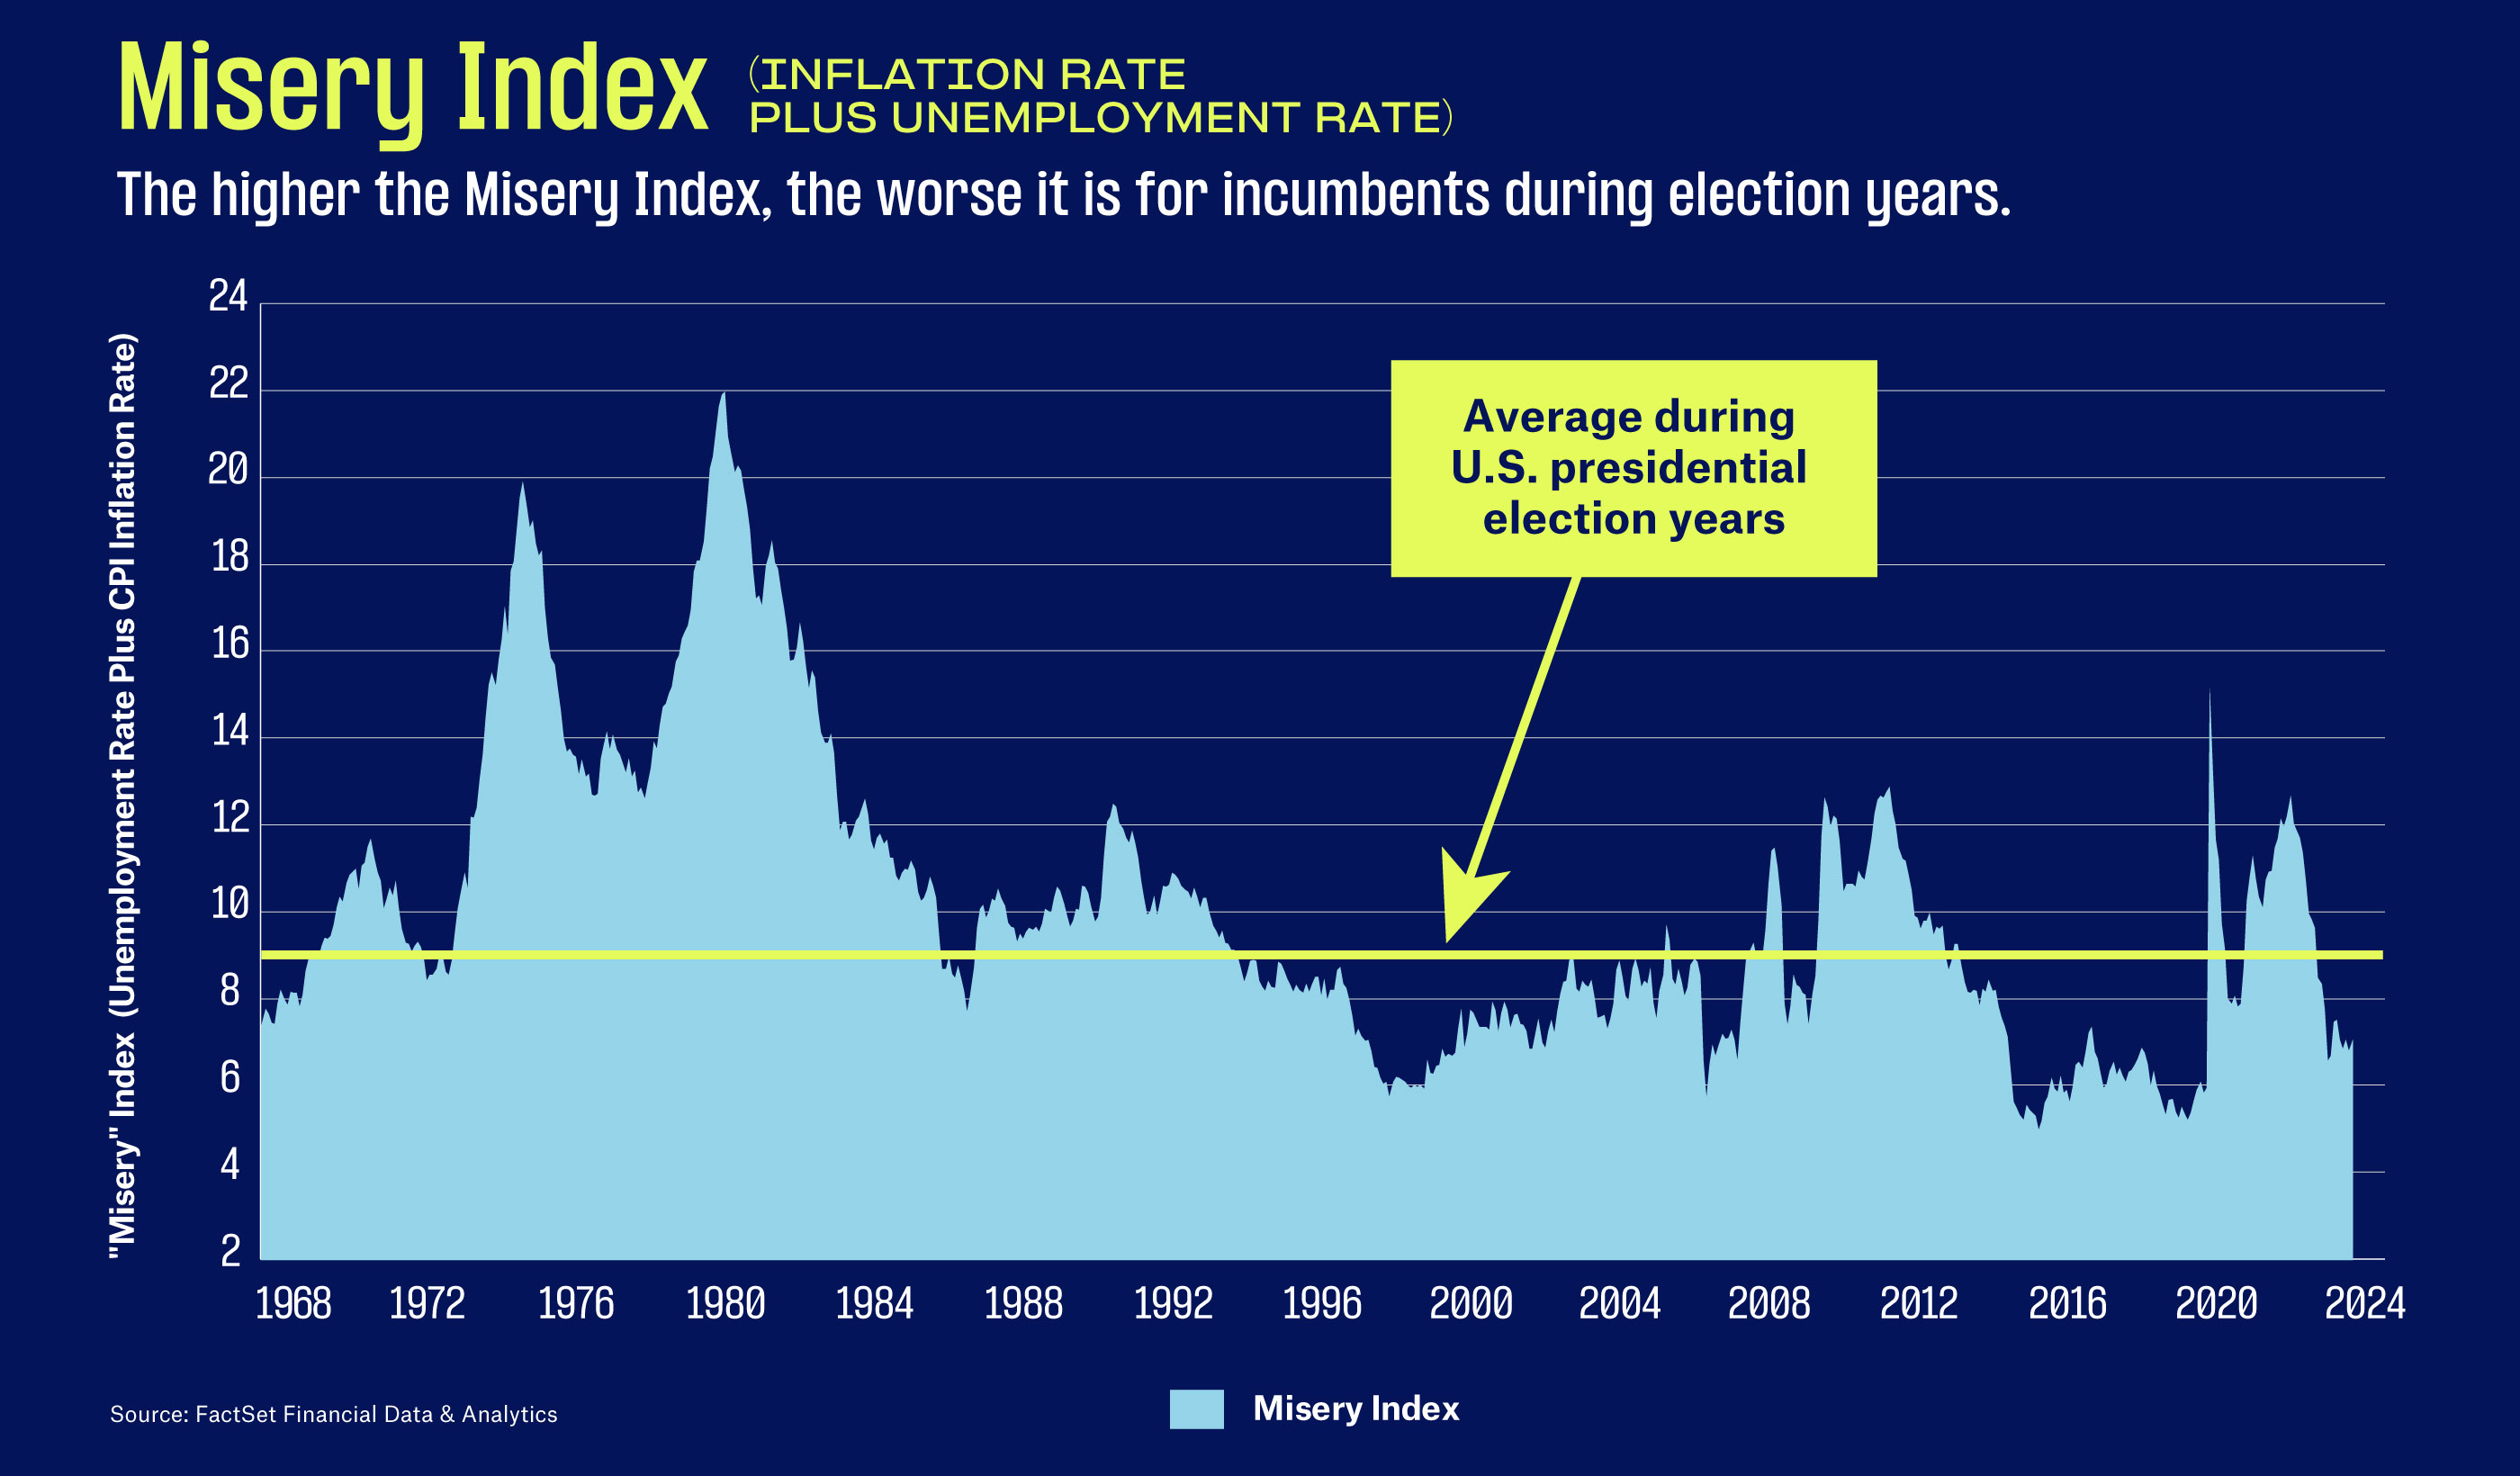 Chart showing that the unemployment rate plus inflation rate heading into the 2024 presidential election is below average 